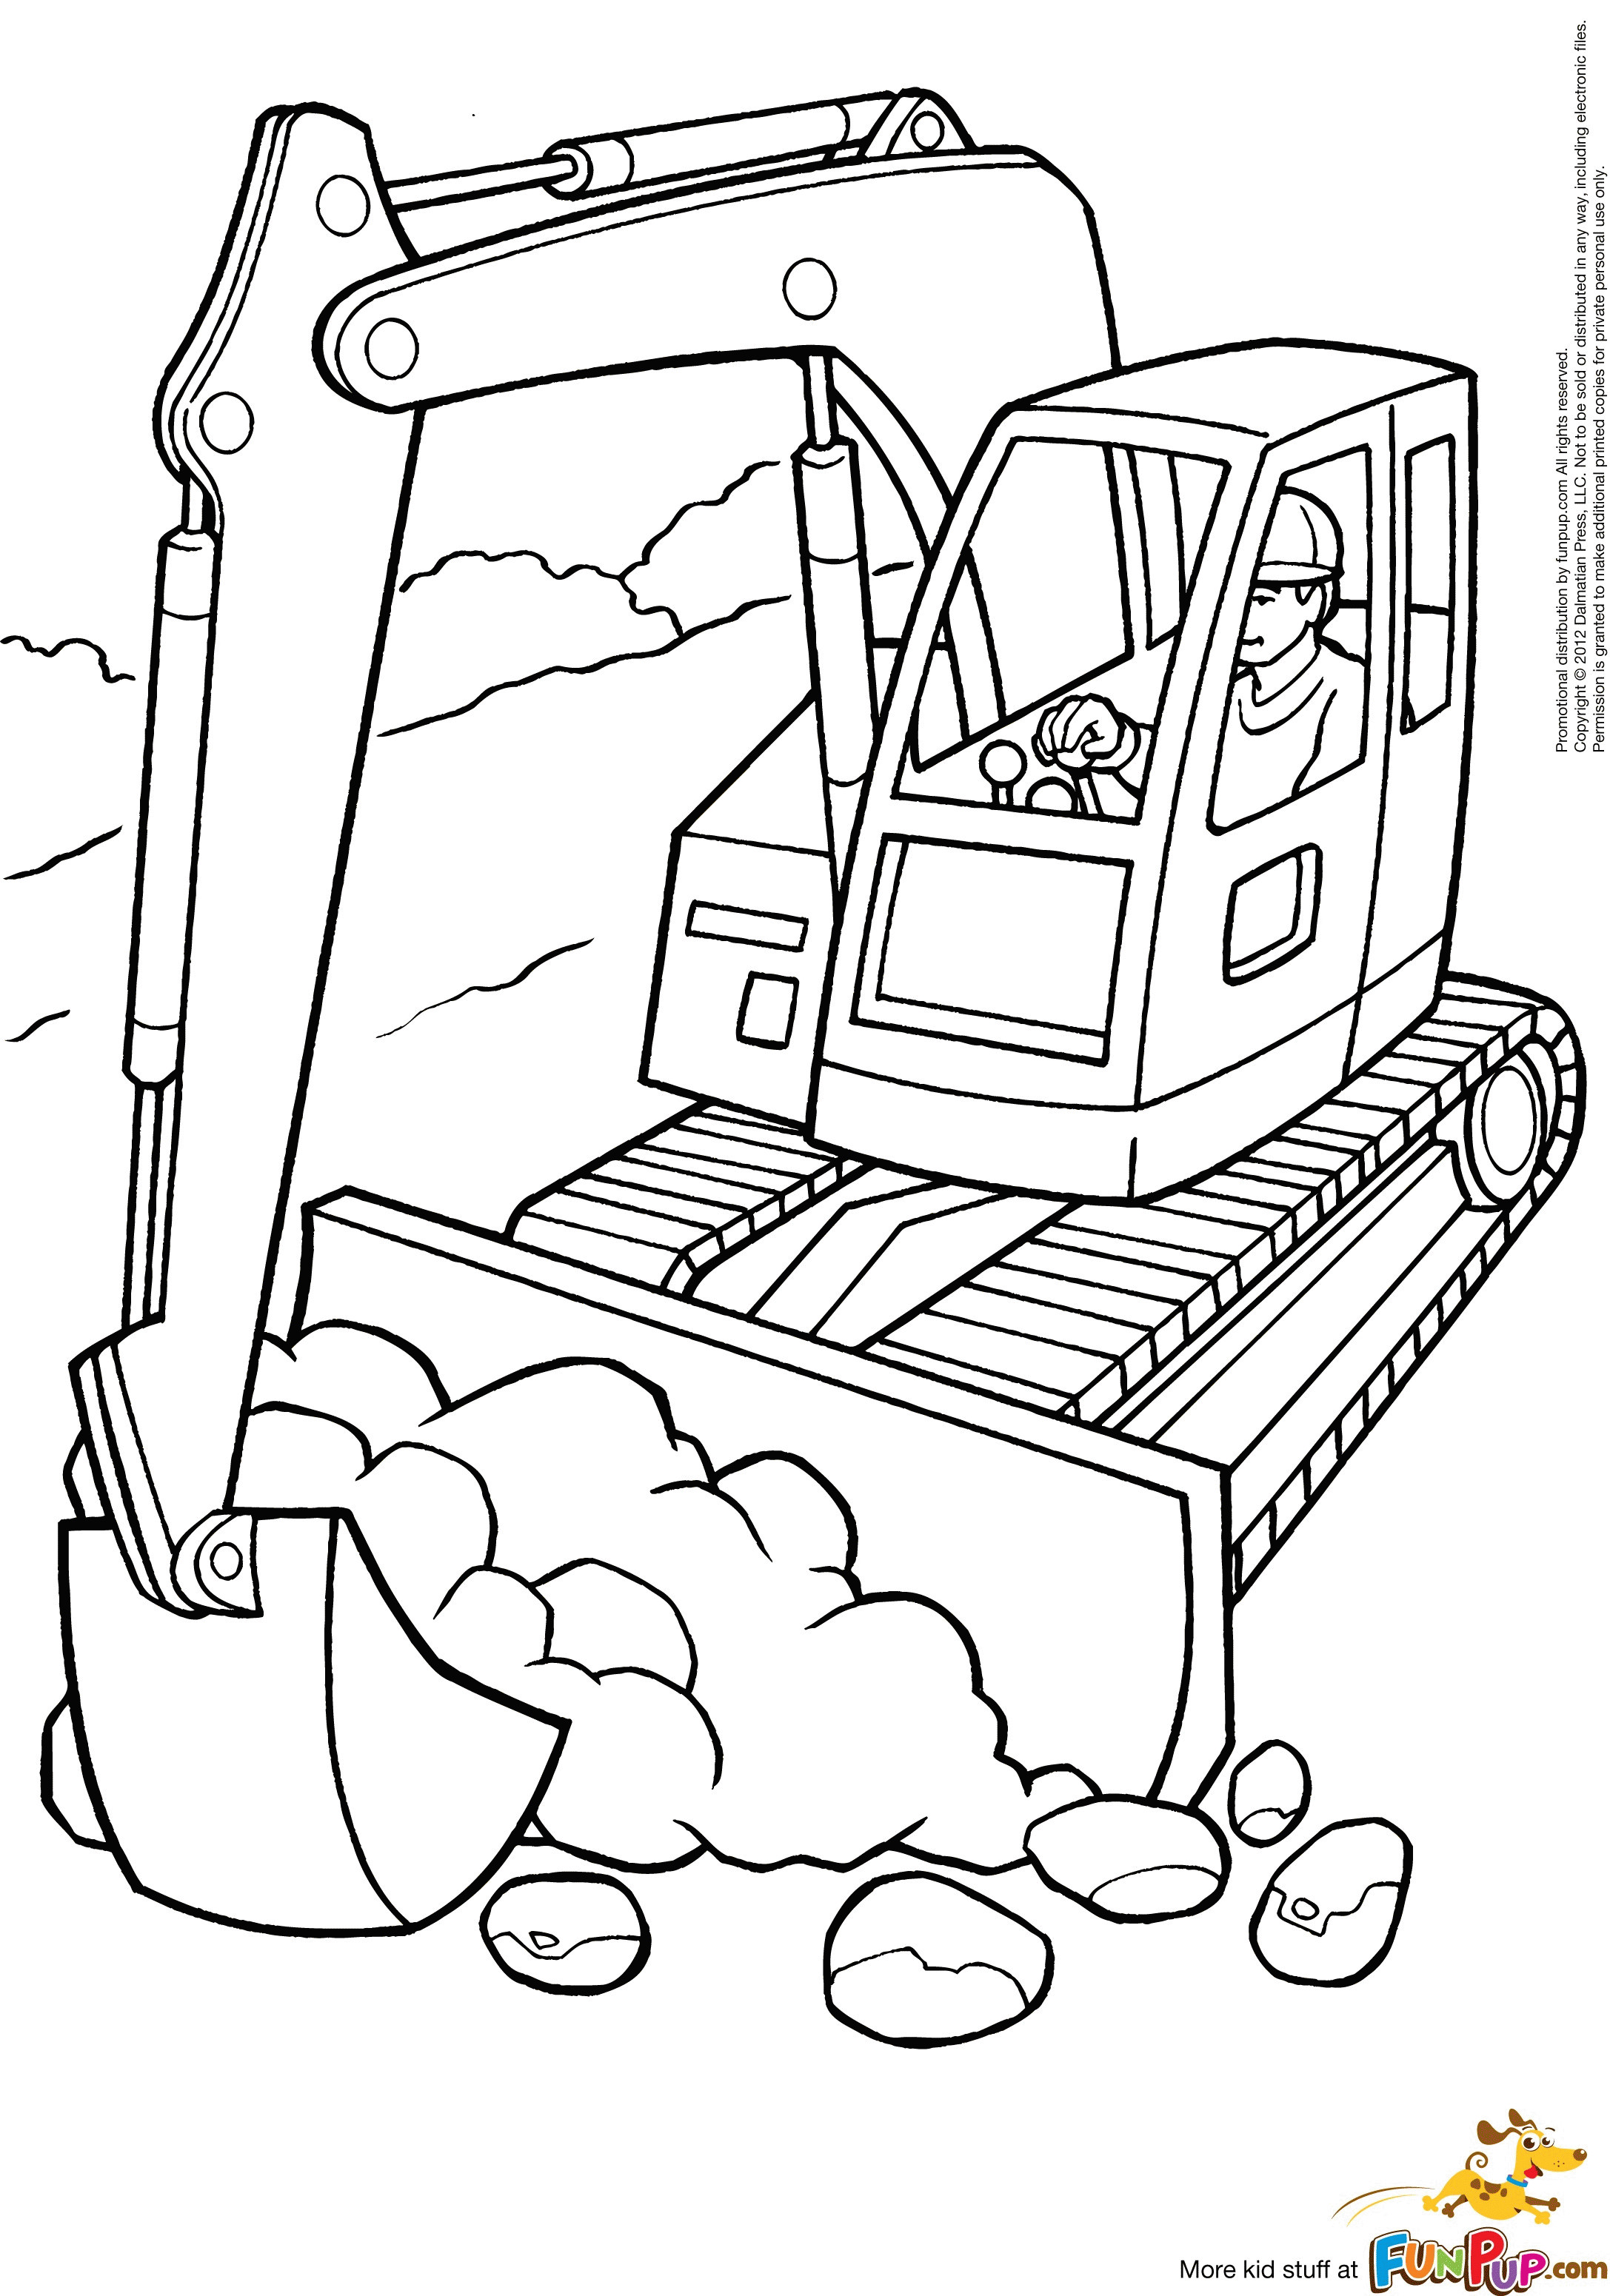 Construction Coloring Pages
 Free Construction Coloring Pages AZ Coloring Pages